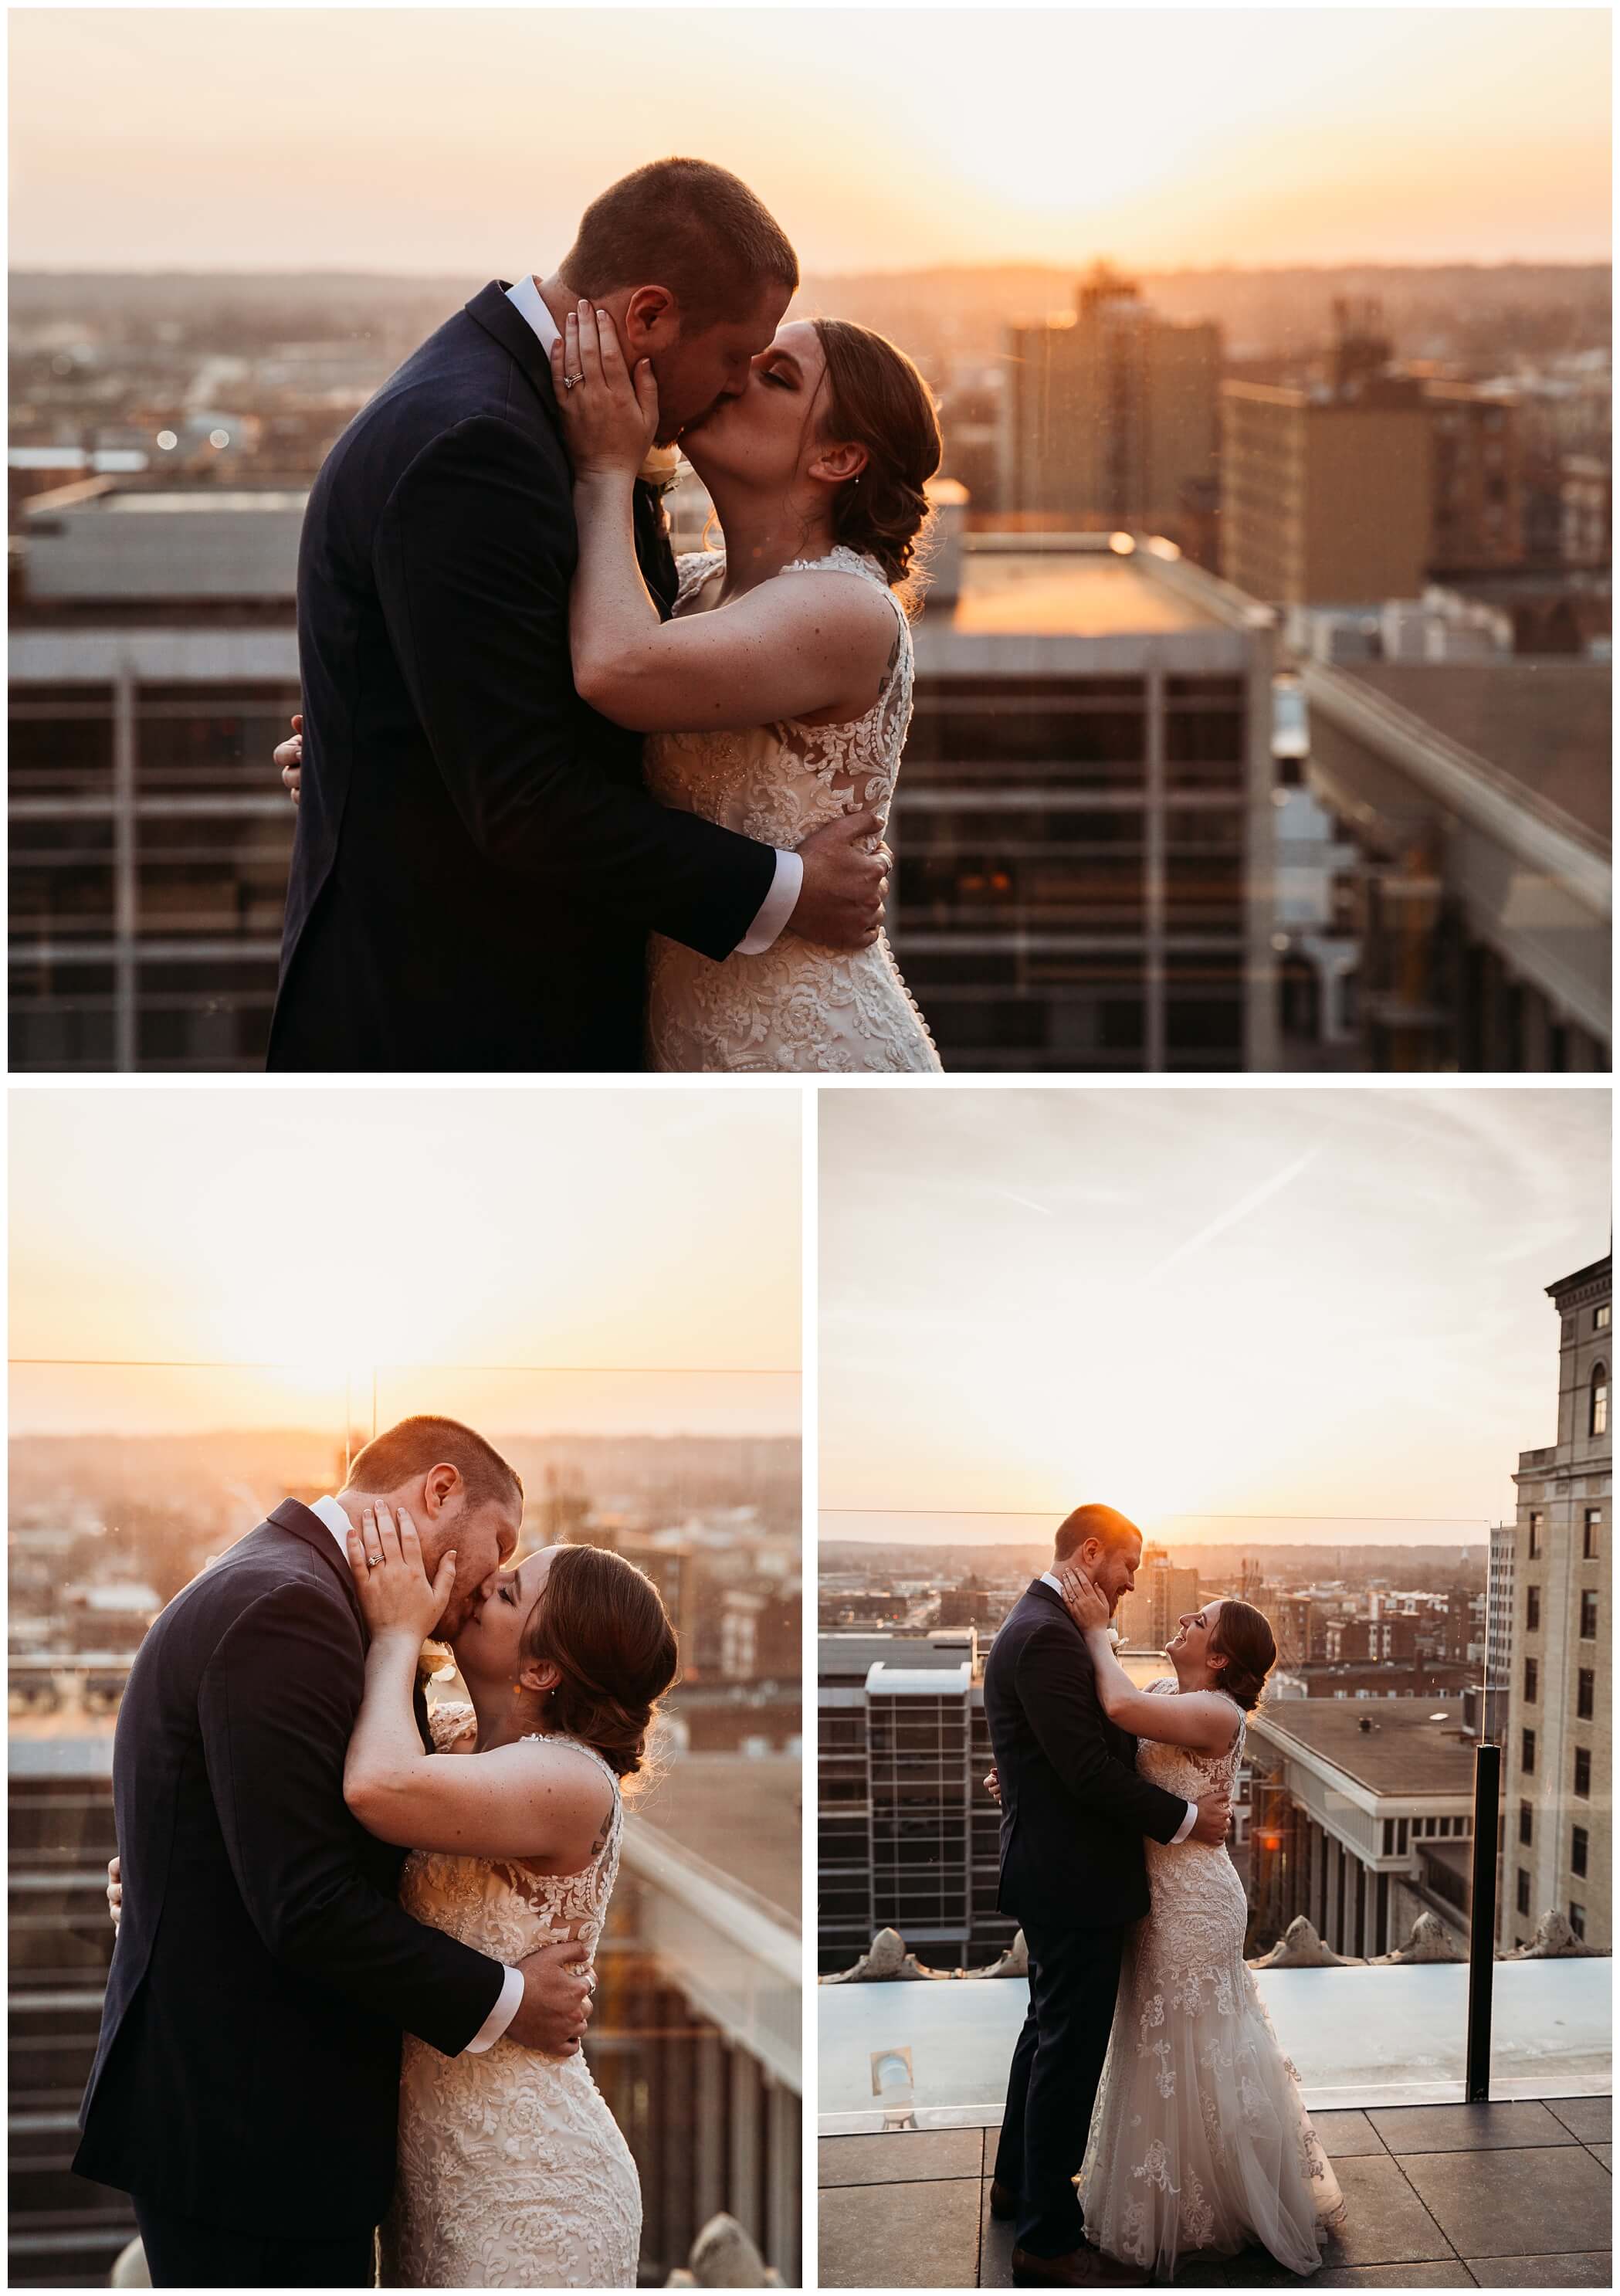 A bride & groom share a kiss at the UP Sky Bar at sunset.